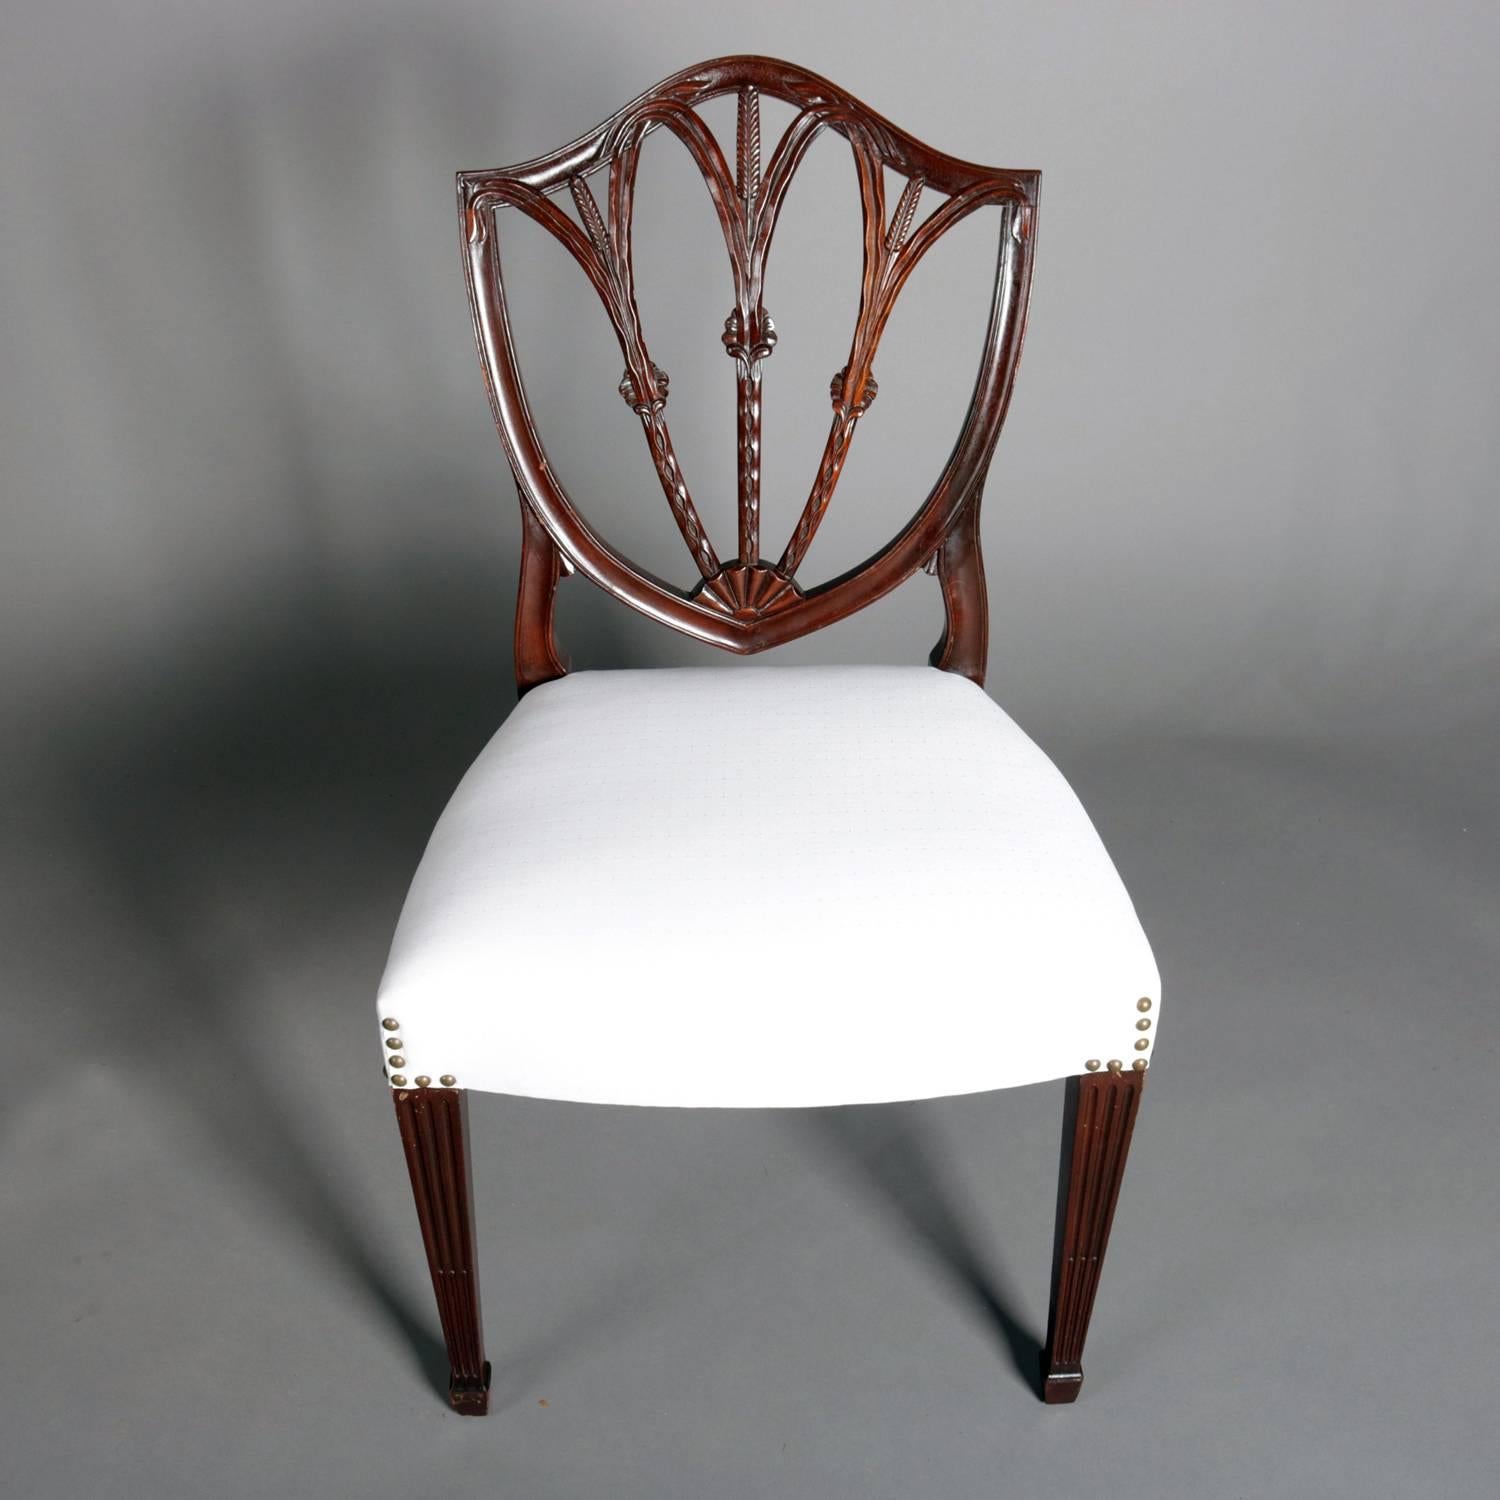 Set of seven Hepplewhite style mahogany shield back dining chairs feature carved wheat form slats and are seated on tapered legs terminating in spade feet, newly upholstered, one armchair and six side chairs, 20th century

Measure: 35.5